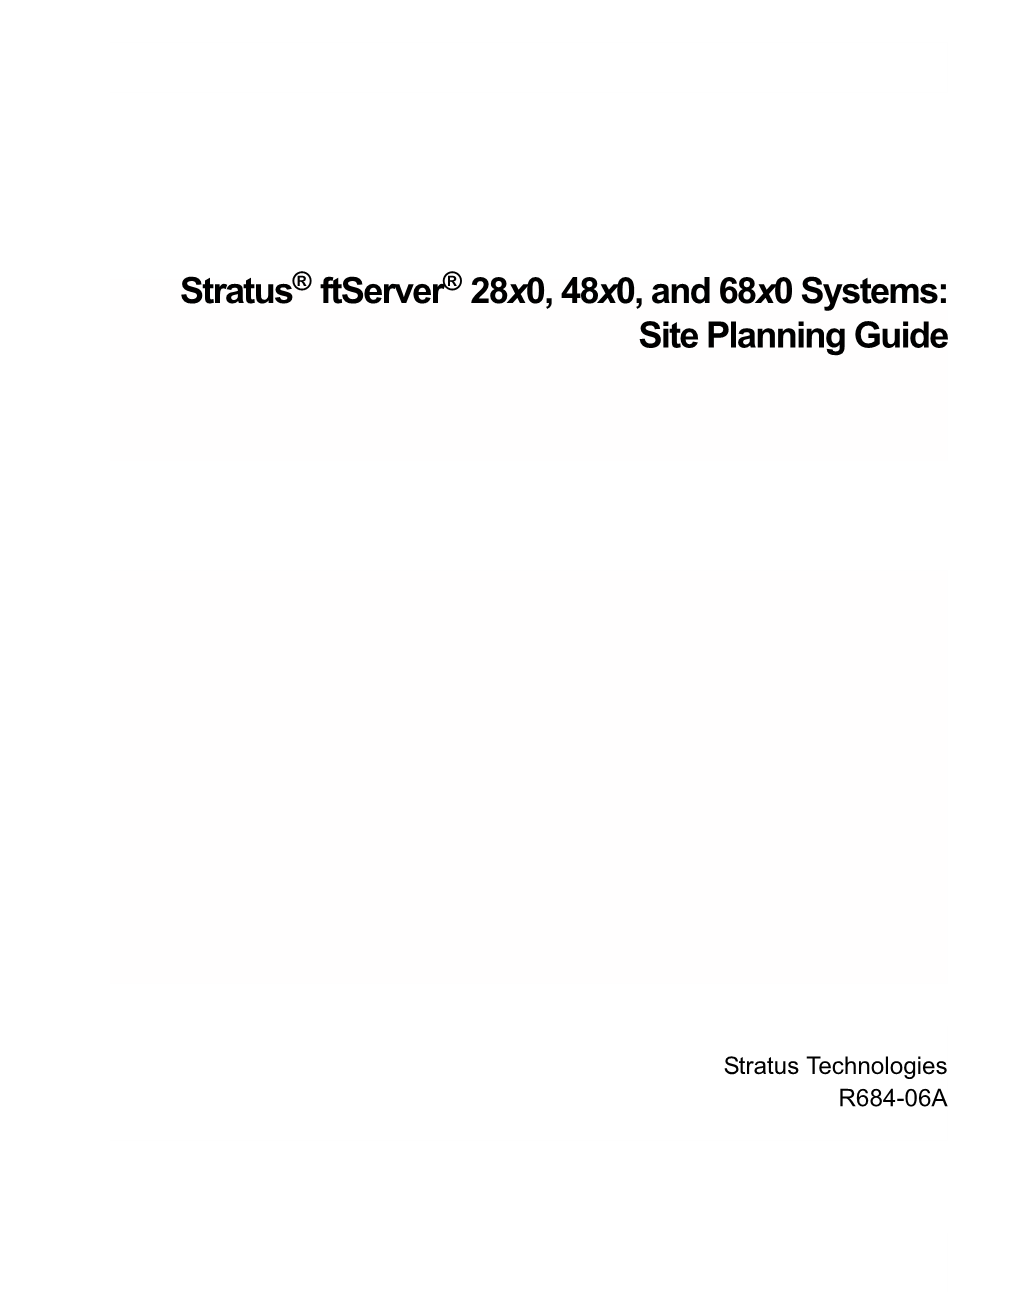 Stratus Ftserver 28X0, 48X0, and 68X0 Systems: Site Planning Guide